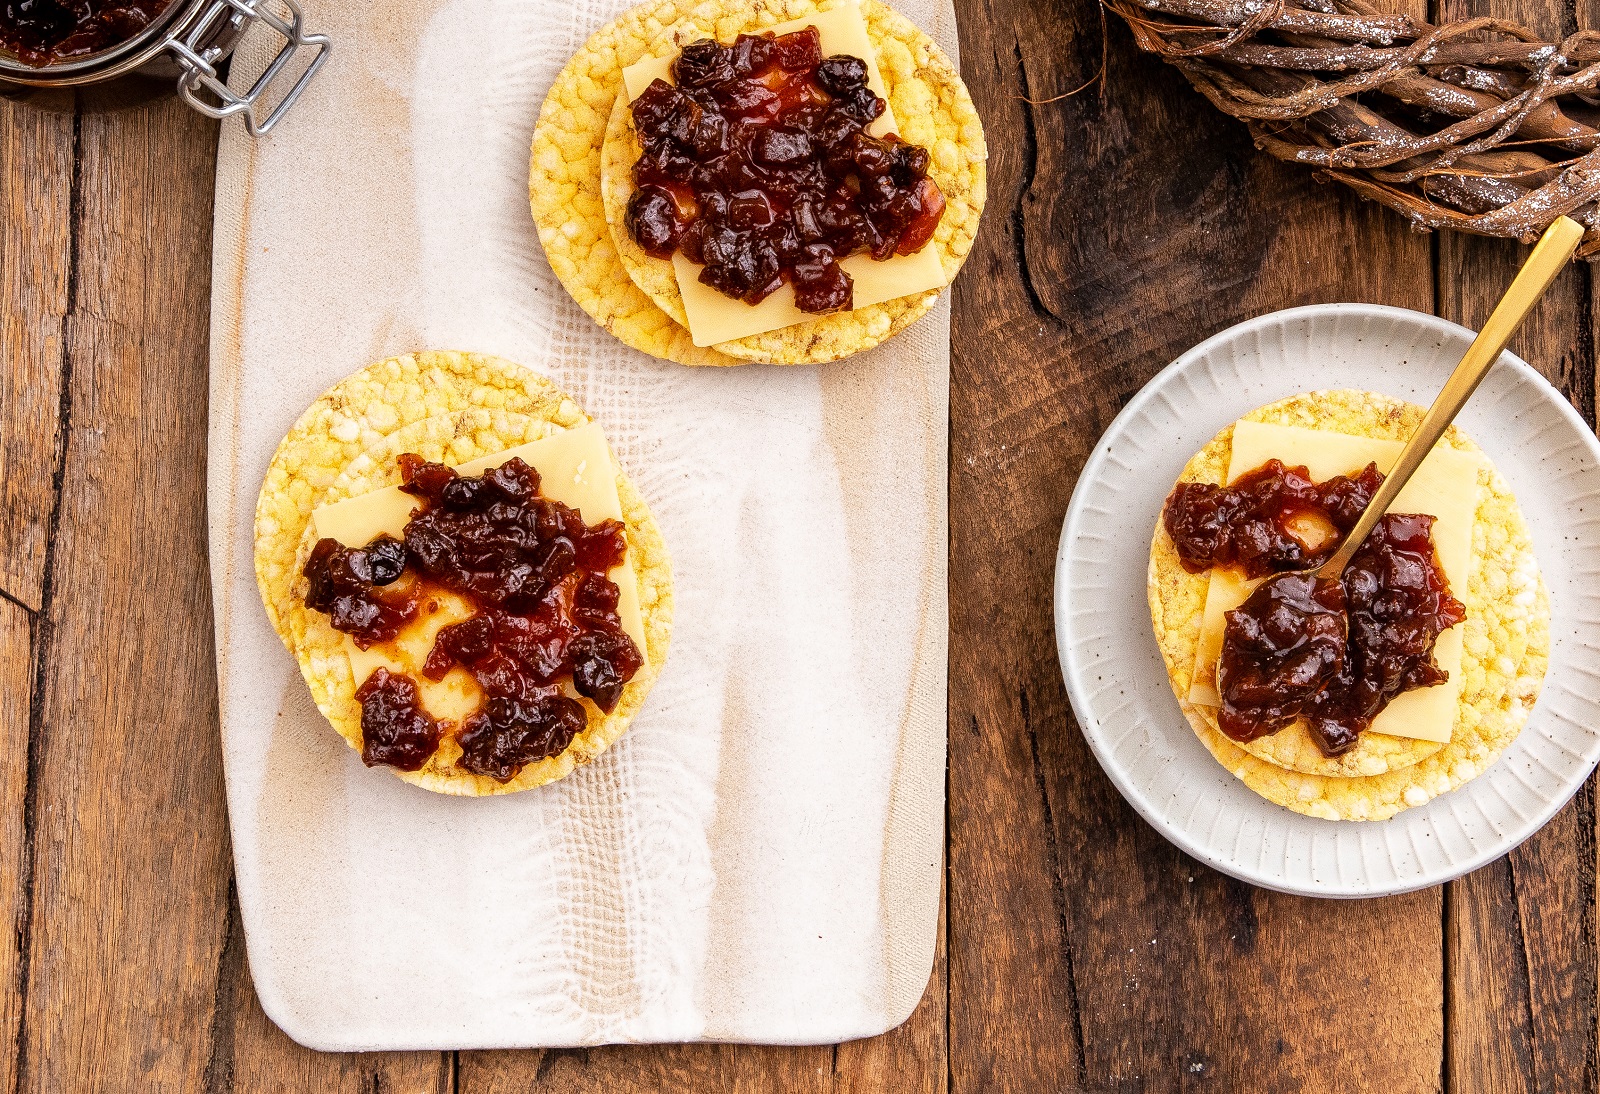 Cheese & Chutney on CORN THINS slices (sweet & salty), snack